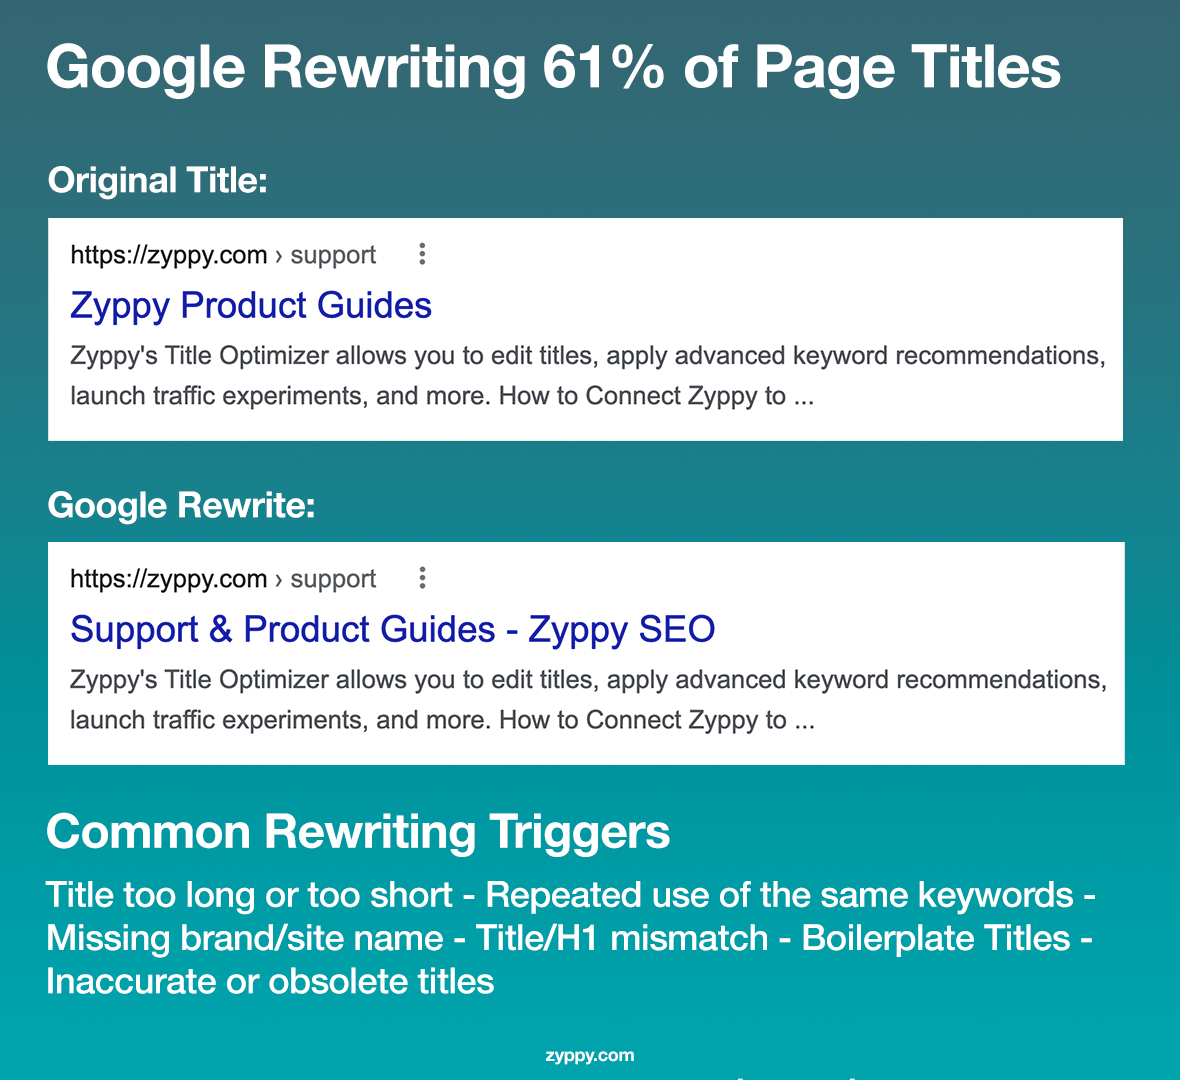 zyppy Google rewriting 61% of page titles